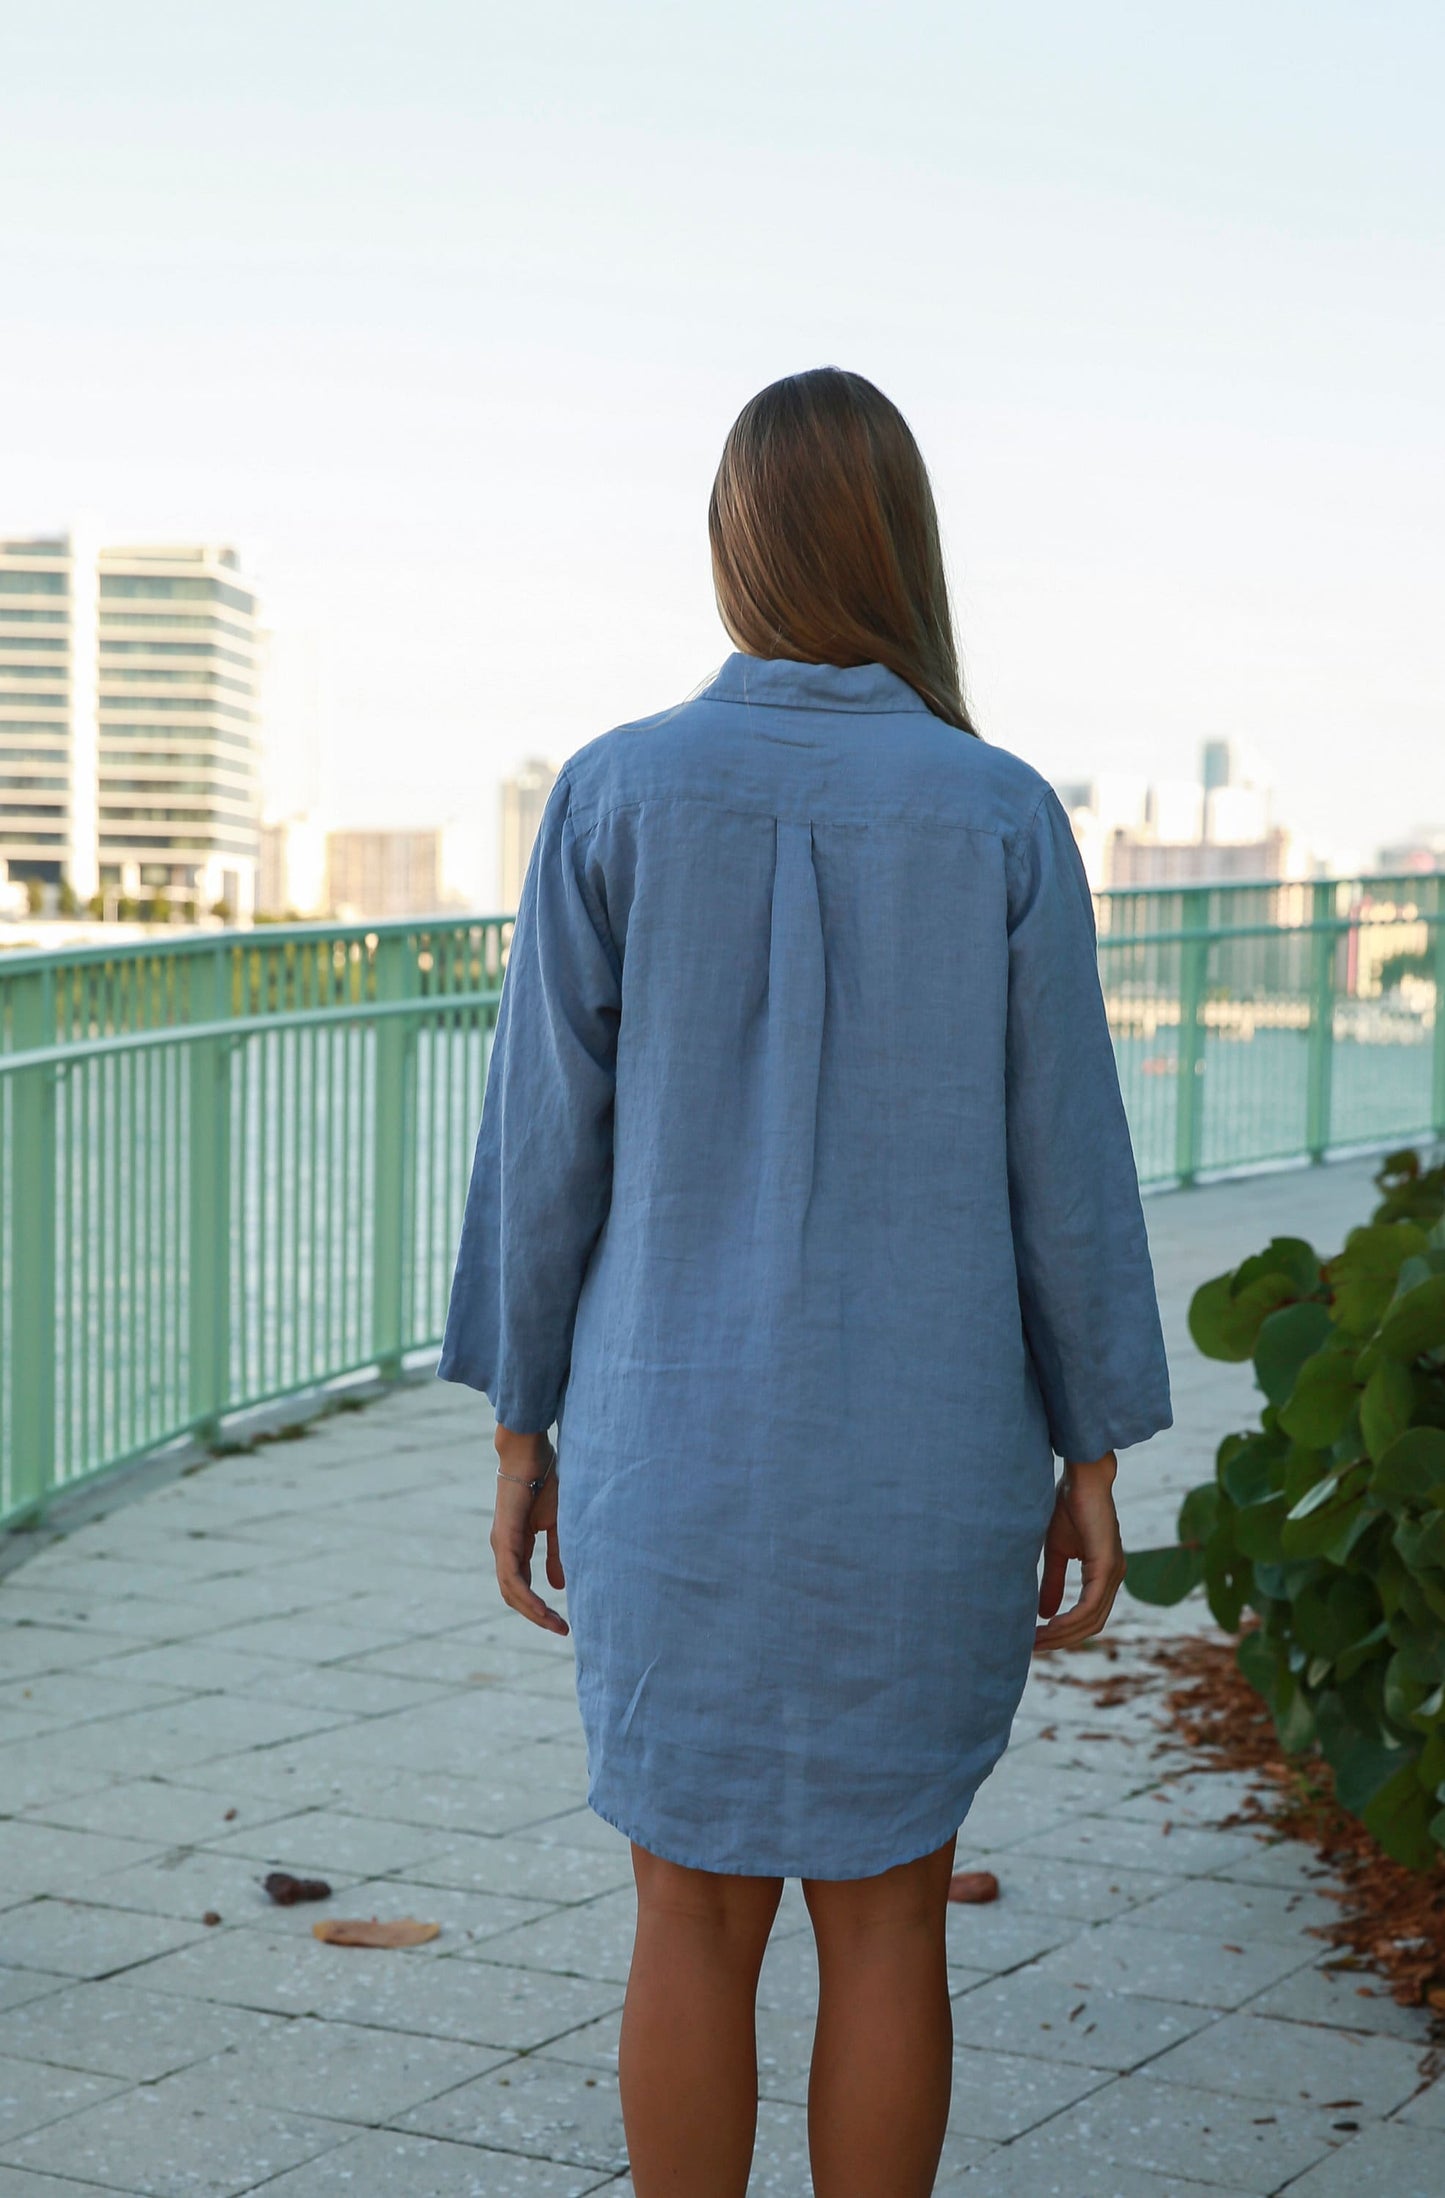 Back view of the long linen shirt, emphasizing its length and elegance.